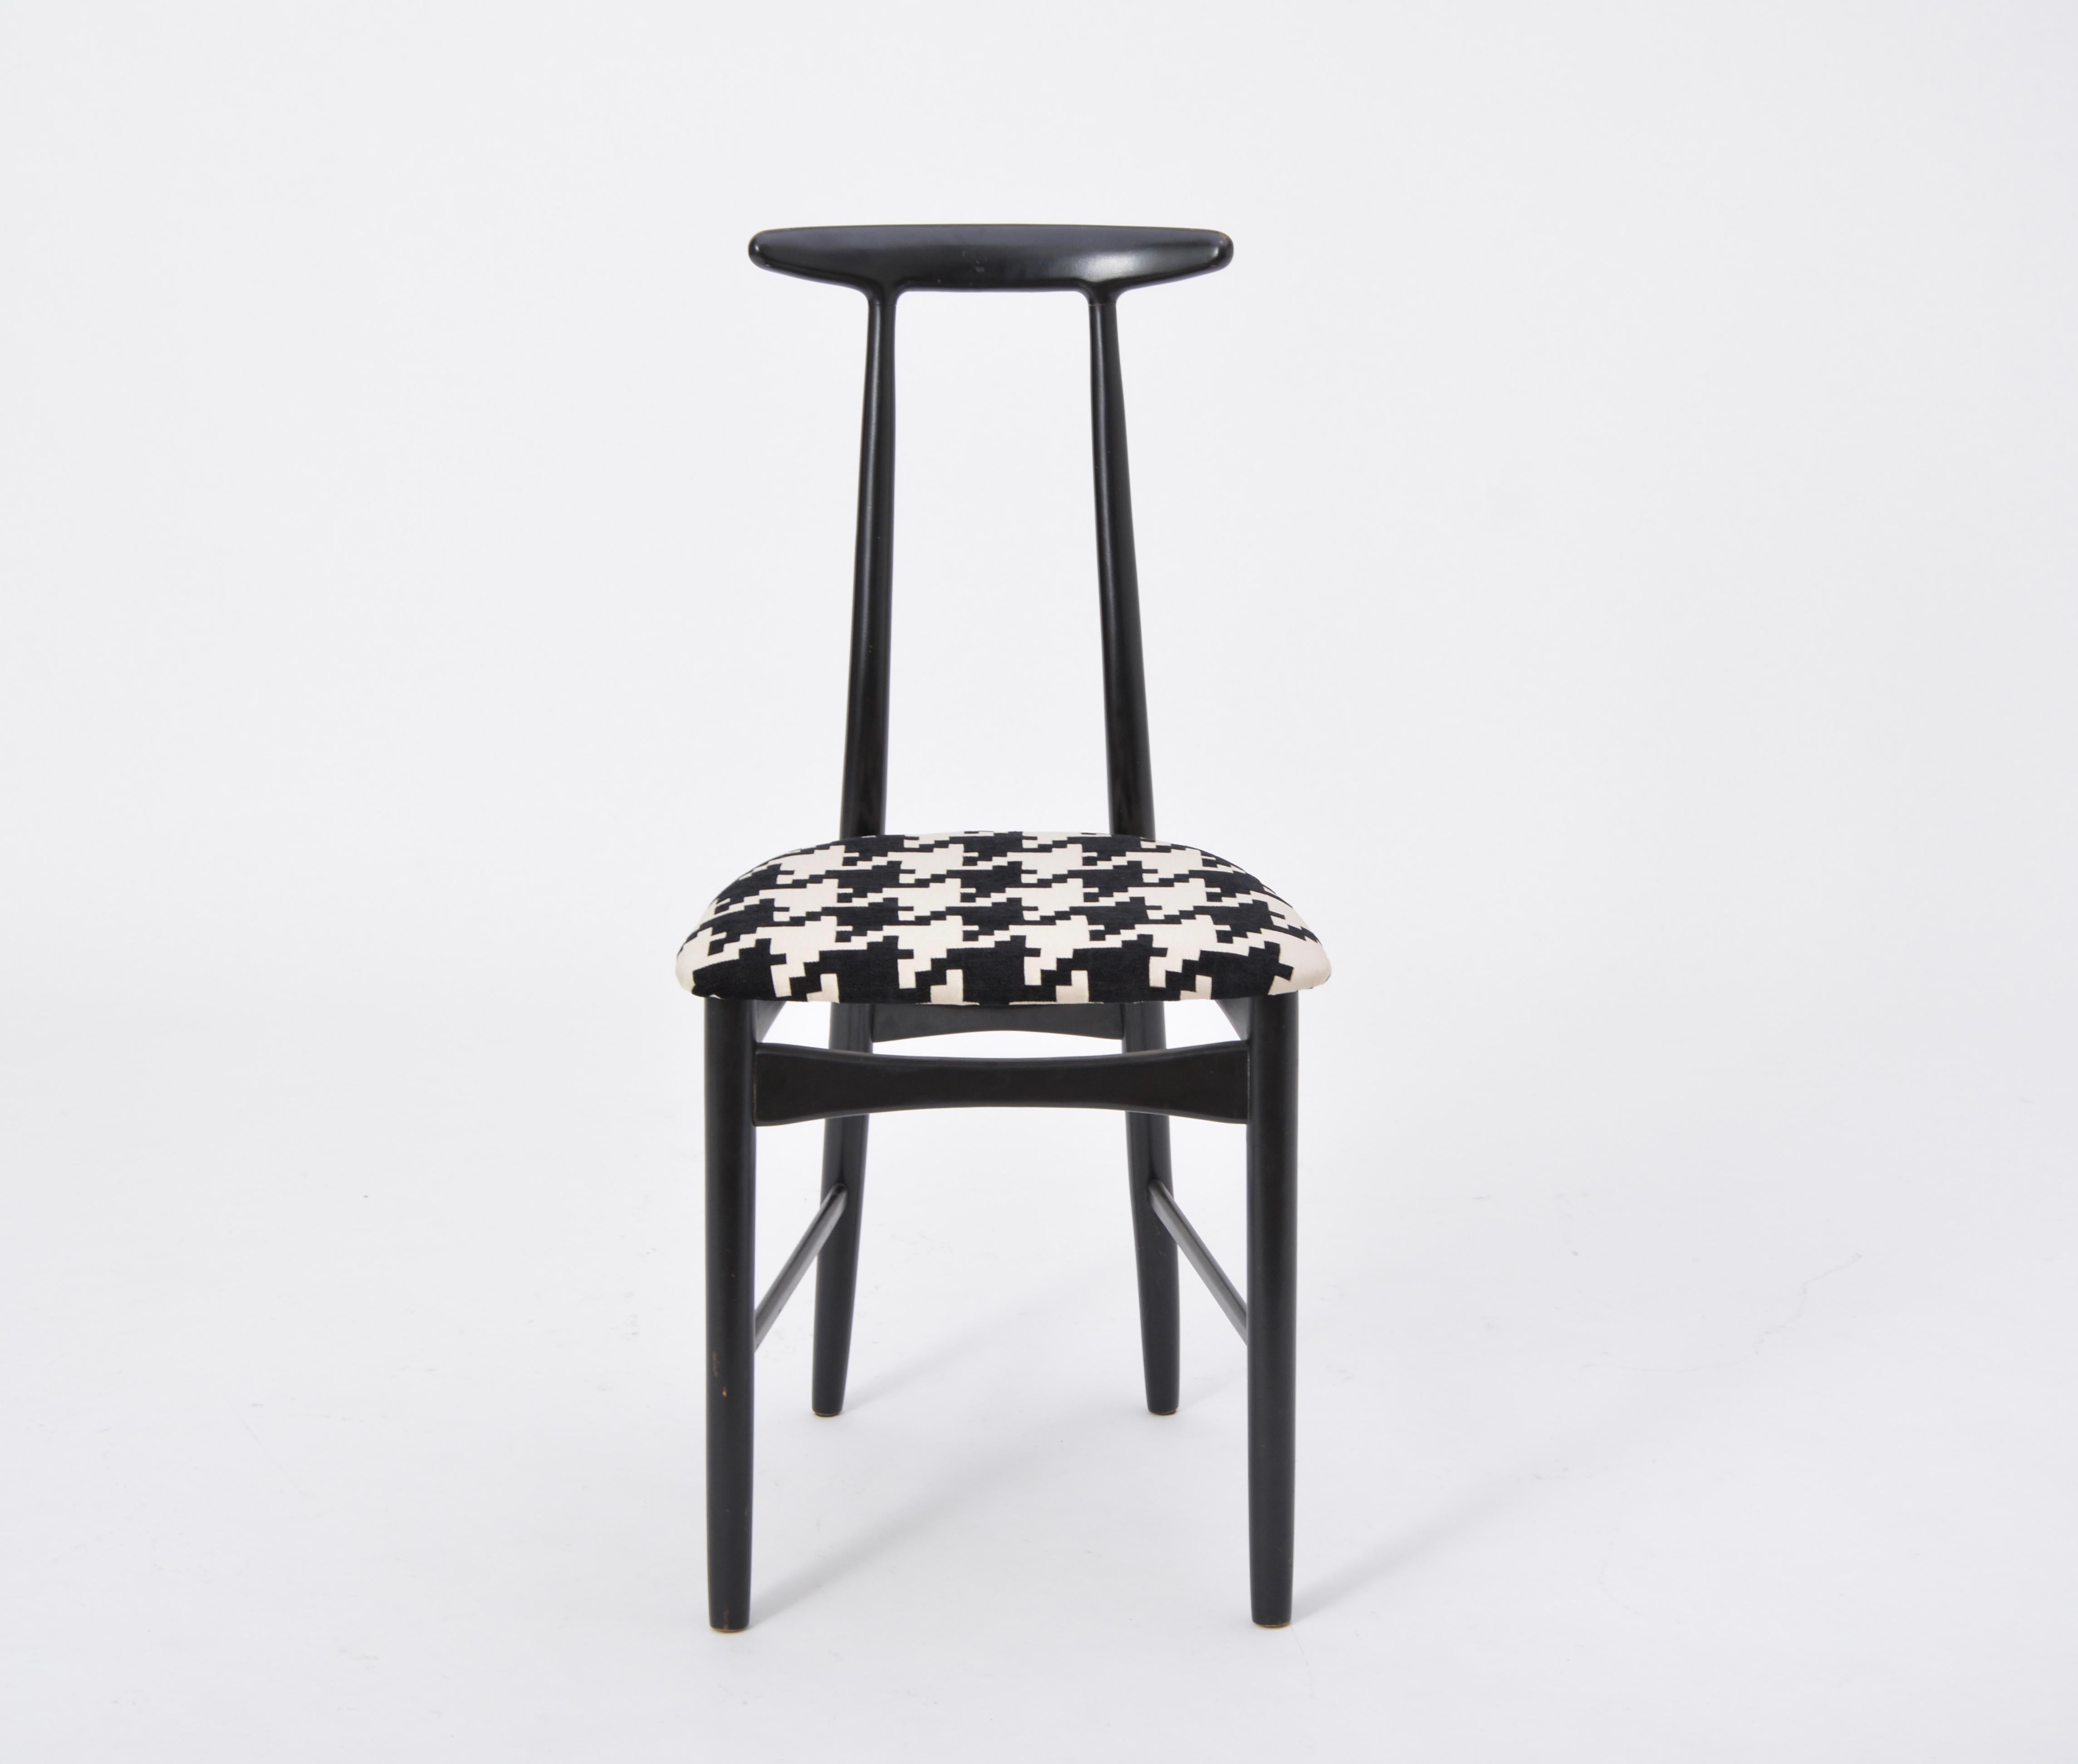 Swedish Mid-Century Modern chair by Gemla Diö

This chair was produced by Gemla Diö in Sweden, circa the 1950s. The frame is made of black-lacquered wood and the chair has been newly reupholstered.